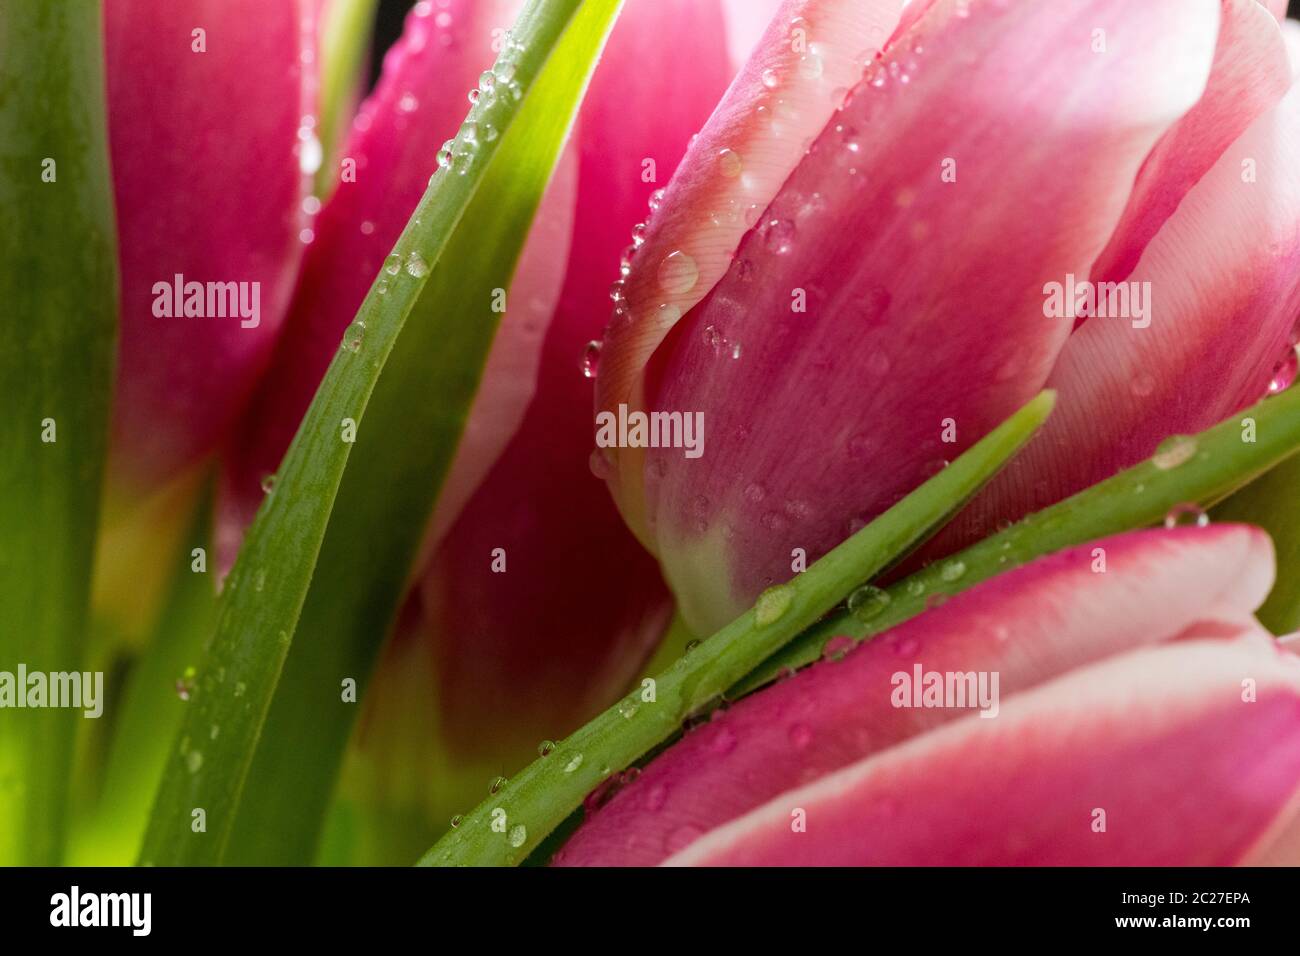 Beautiful pink tulip bouquet with water drops on it isolated on black background. Stock Photo